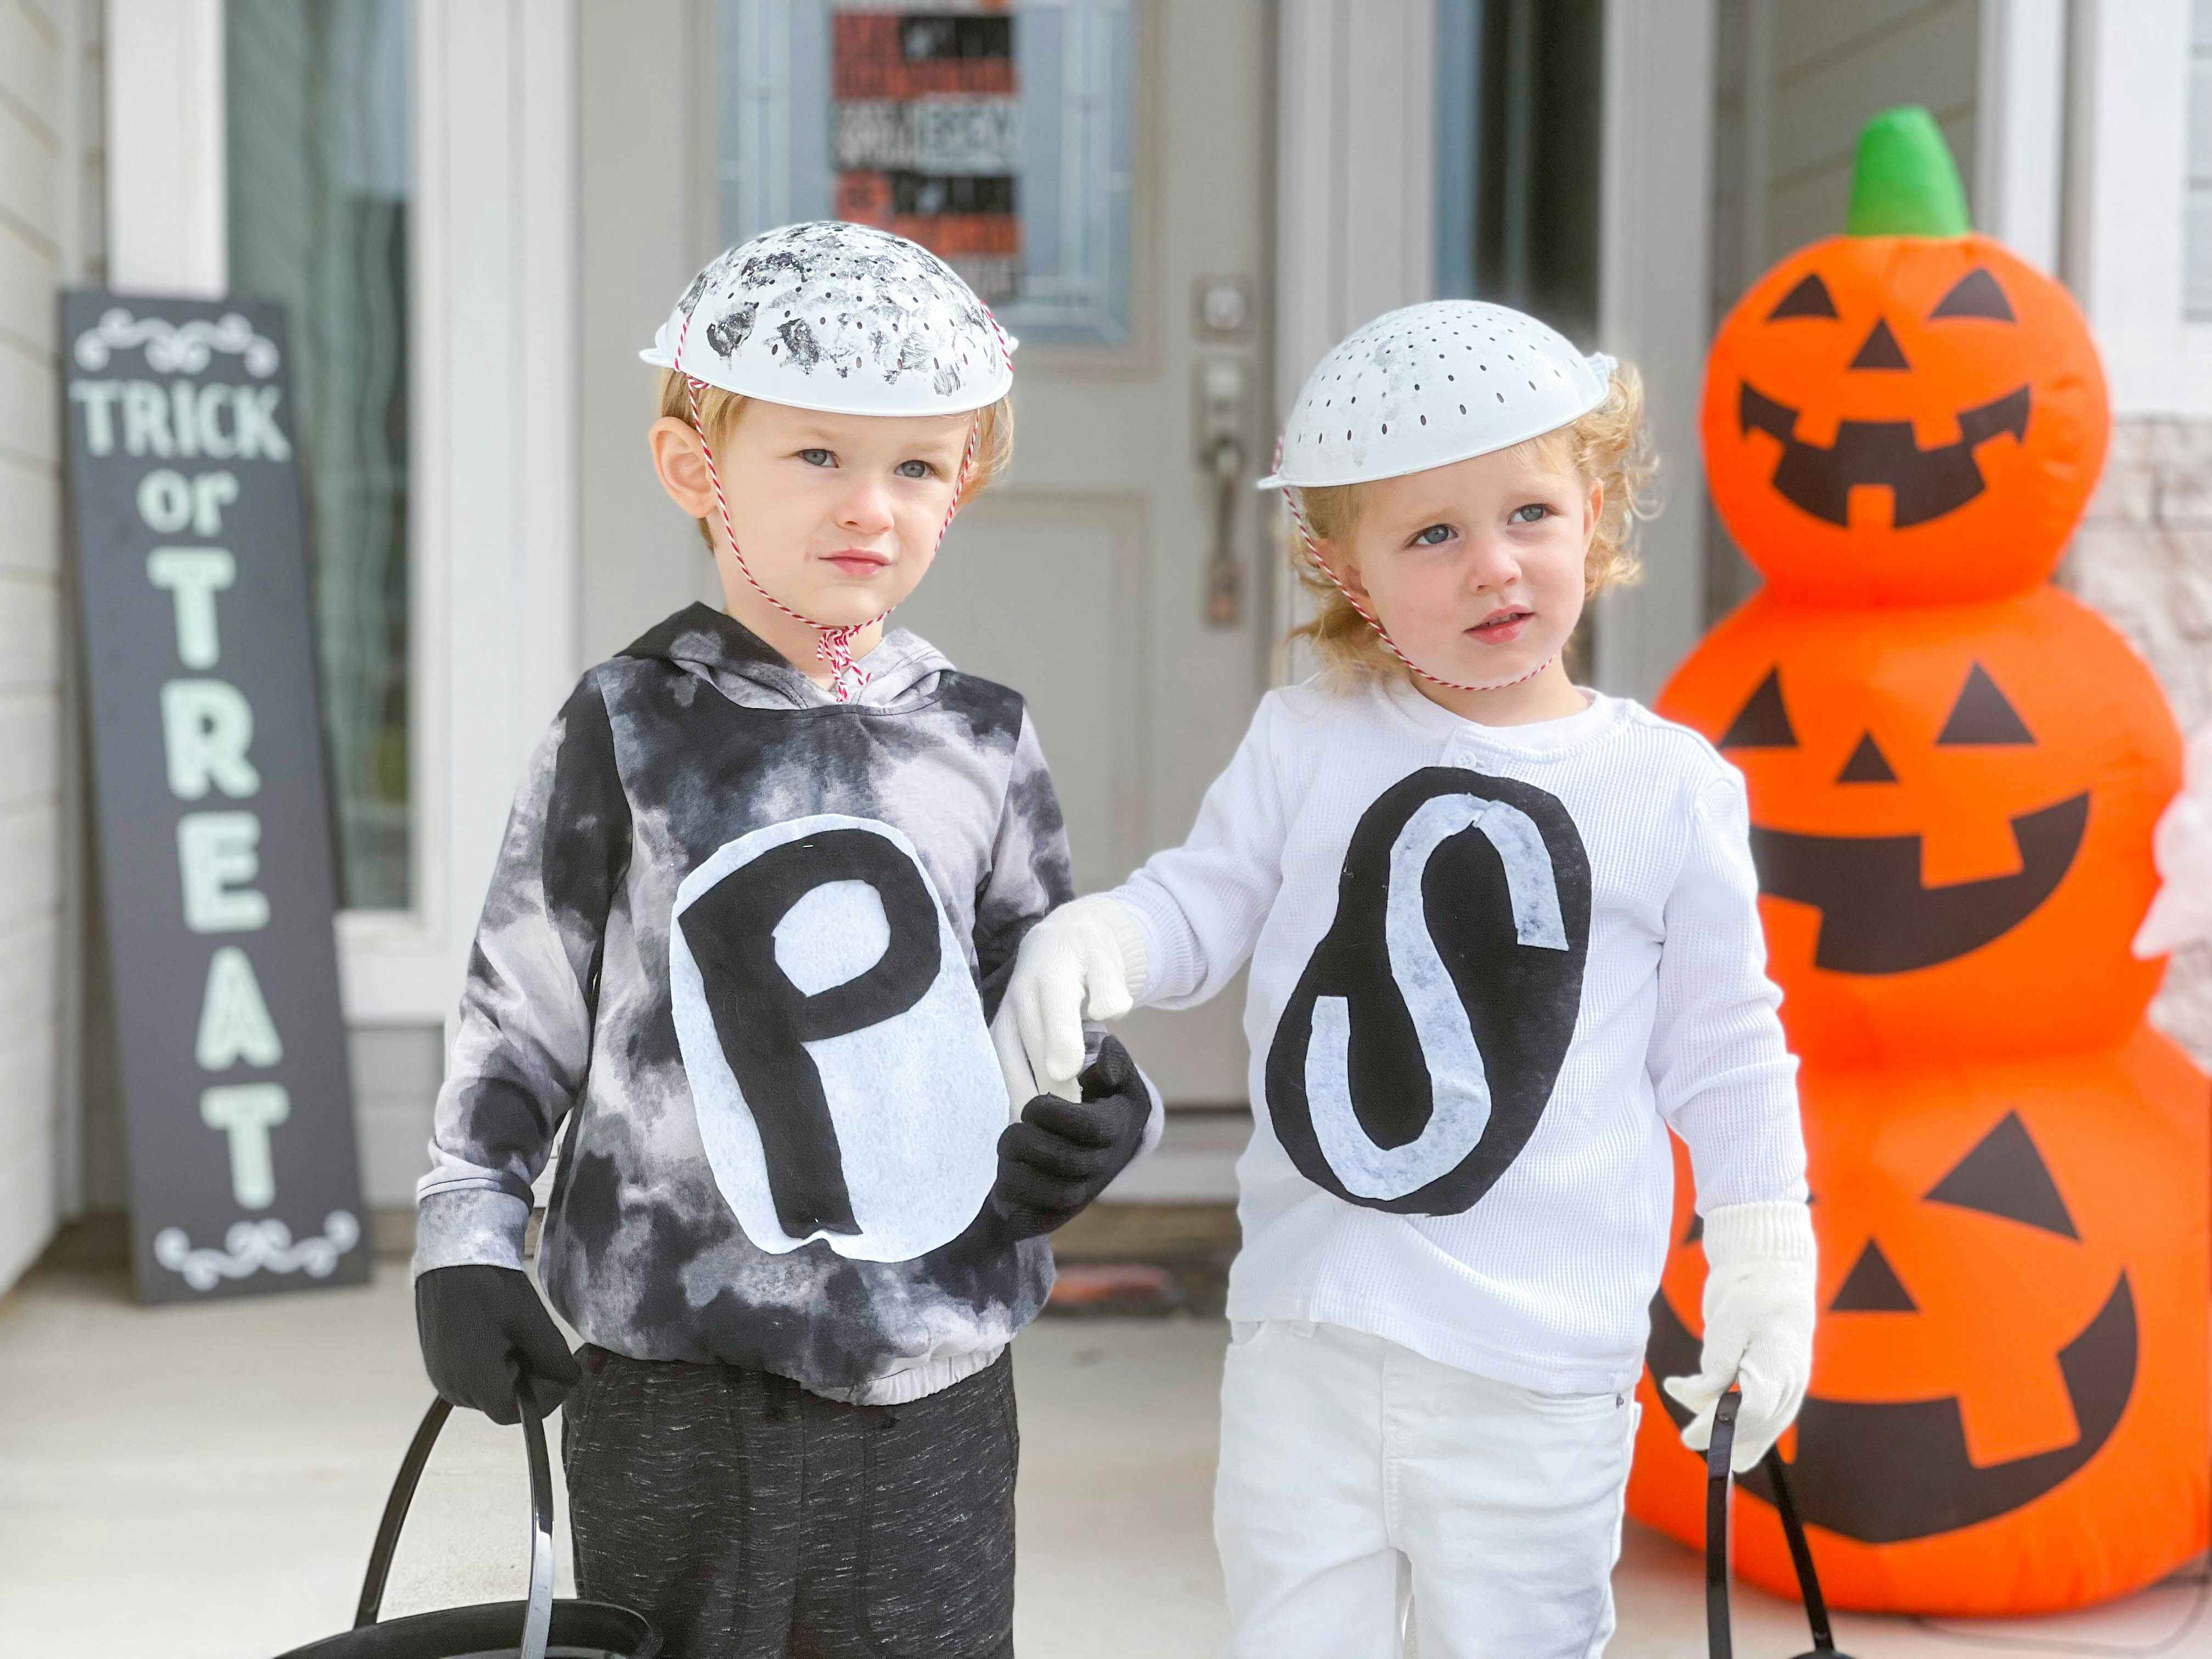 Two kids in salt and pepper costumes holding hands on the porch in front of some Halloween decorations.